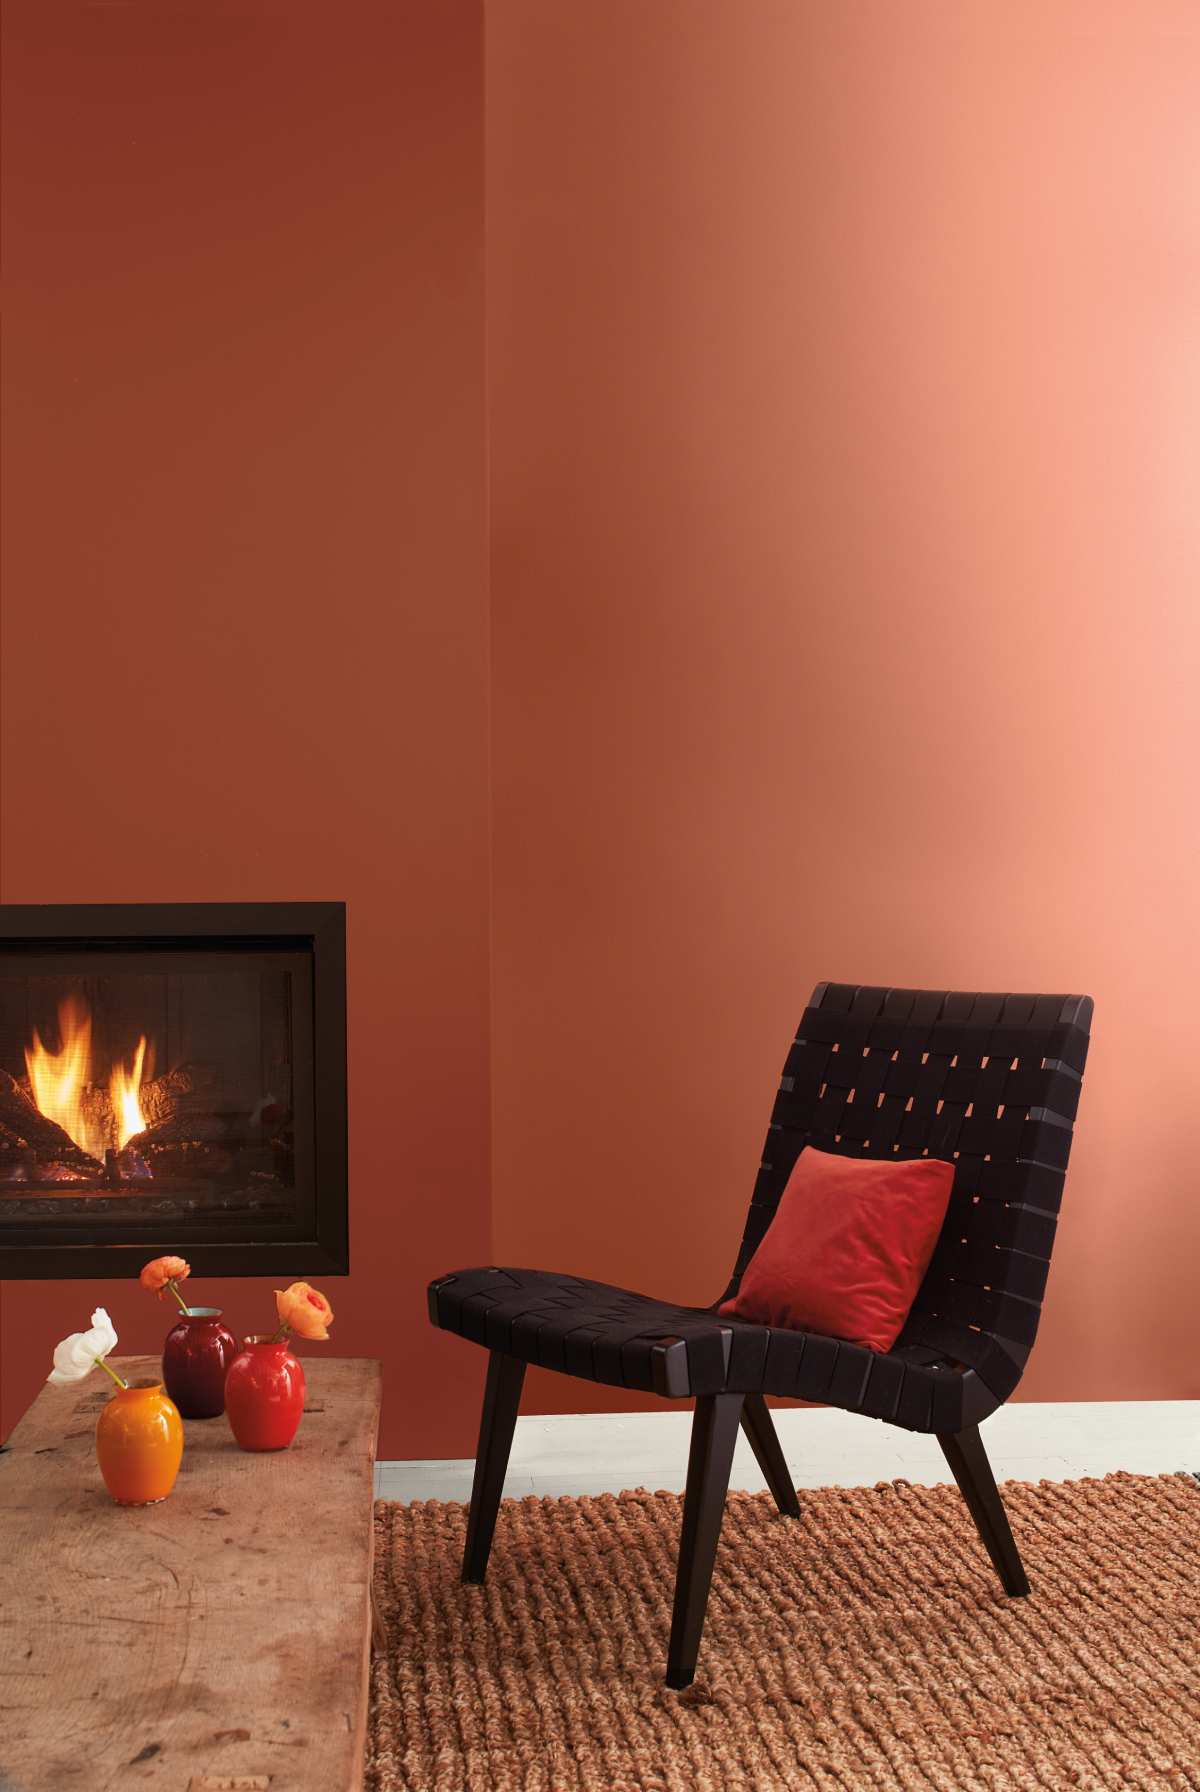 A chair in front of a low table near a burning fireplace